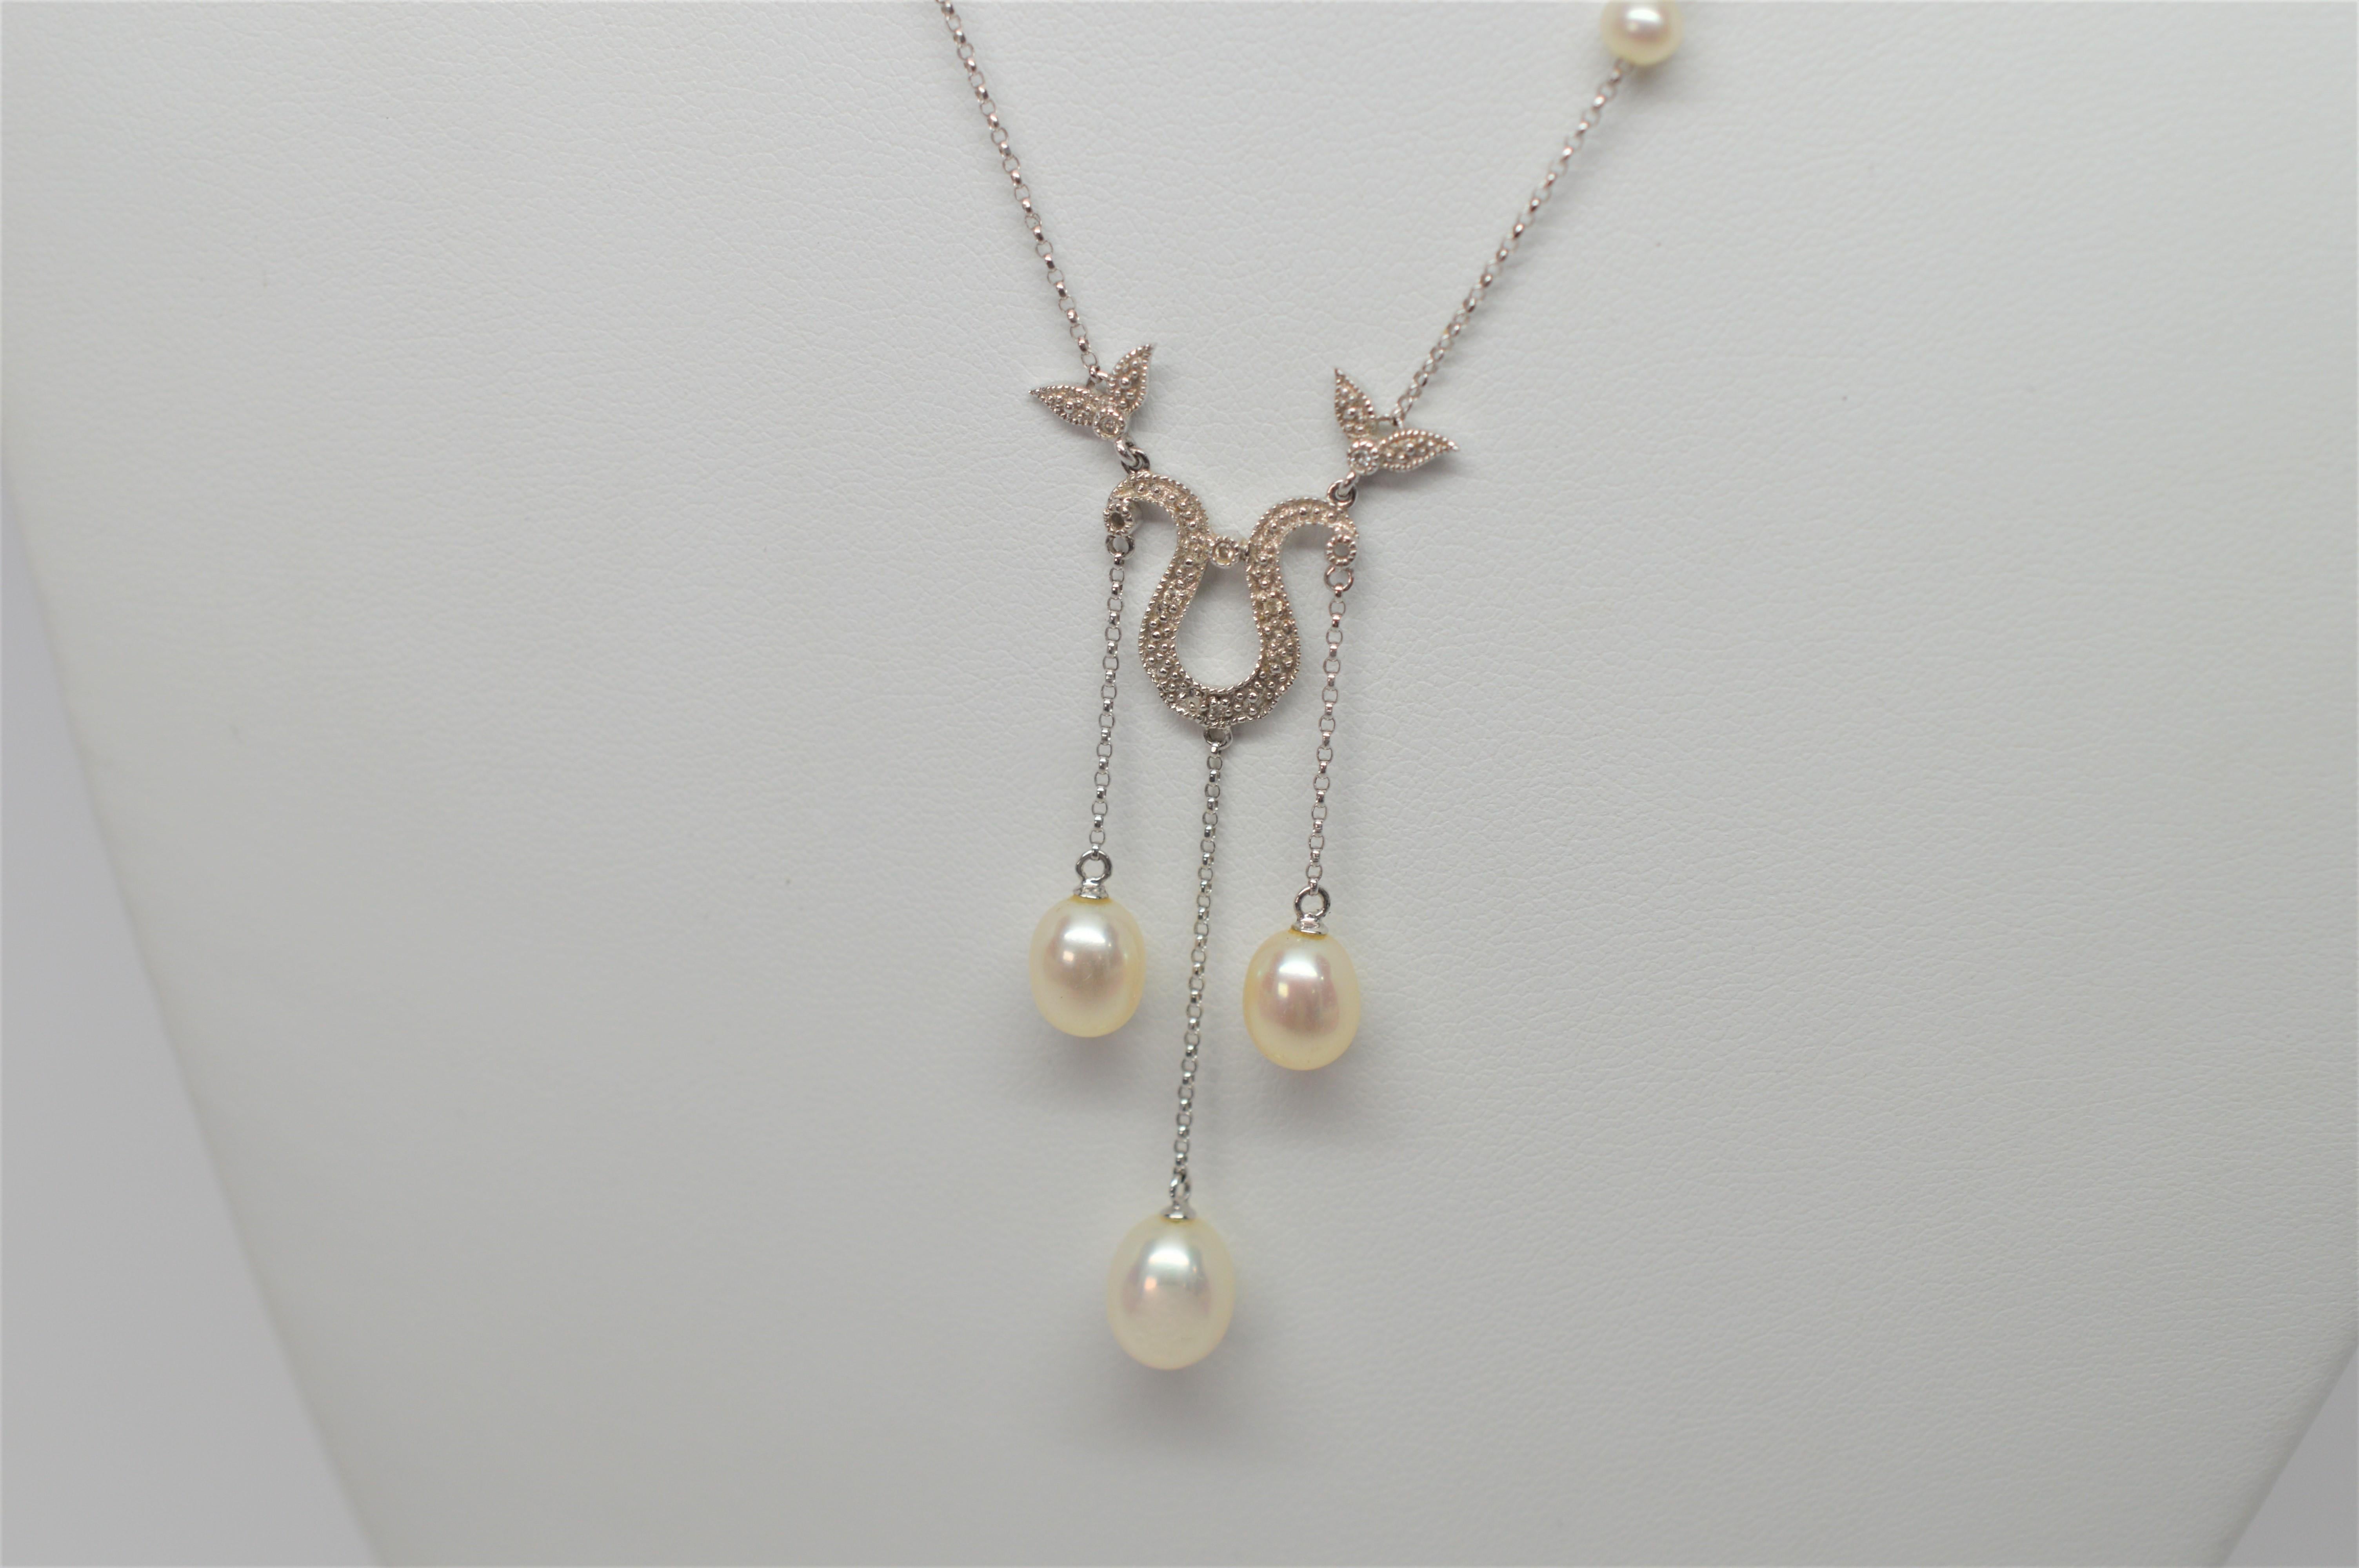 Women's White Gold and Pearl Teardrop Pendant Necklace with Diamond Enhancements